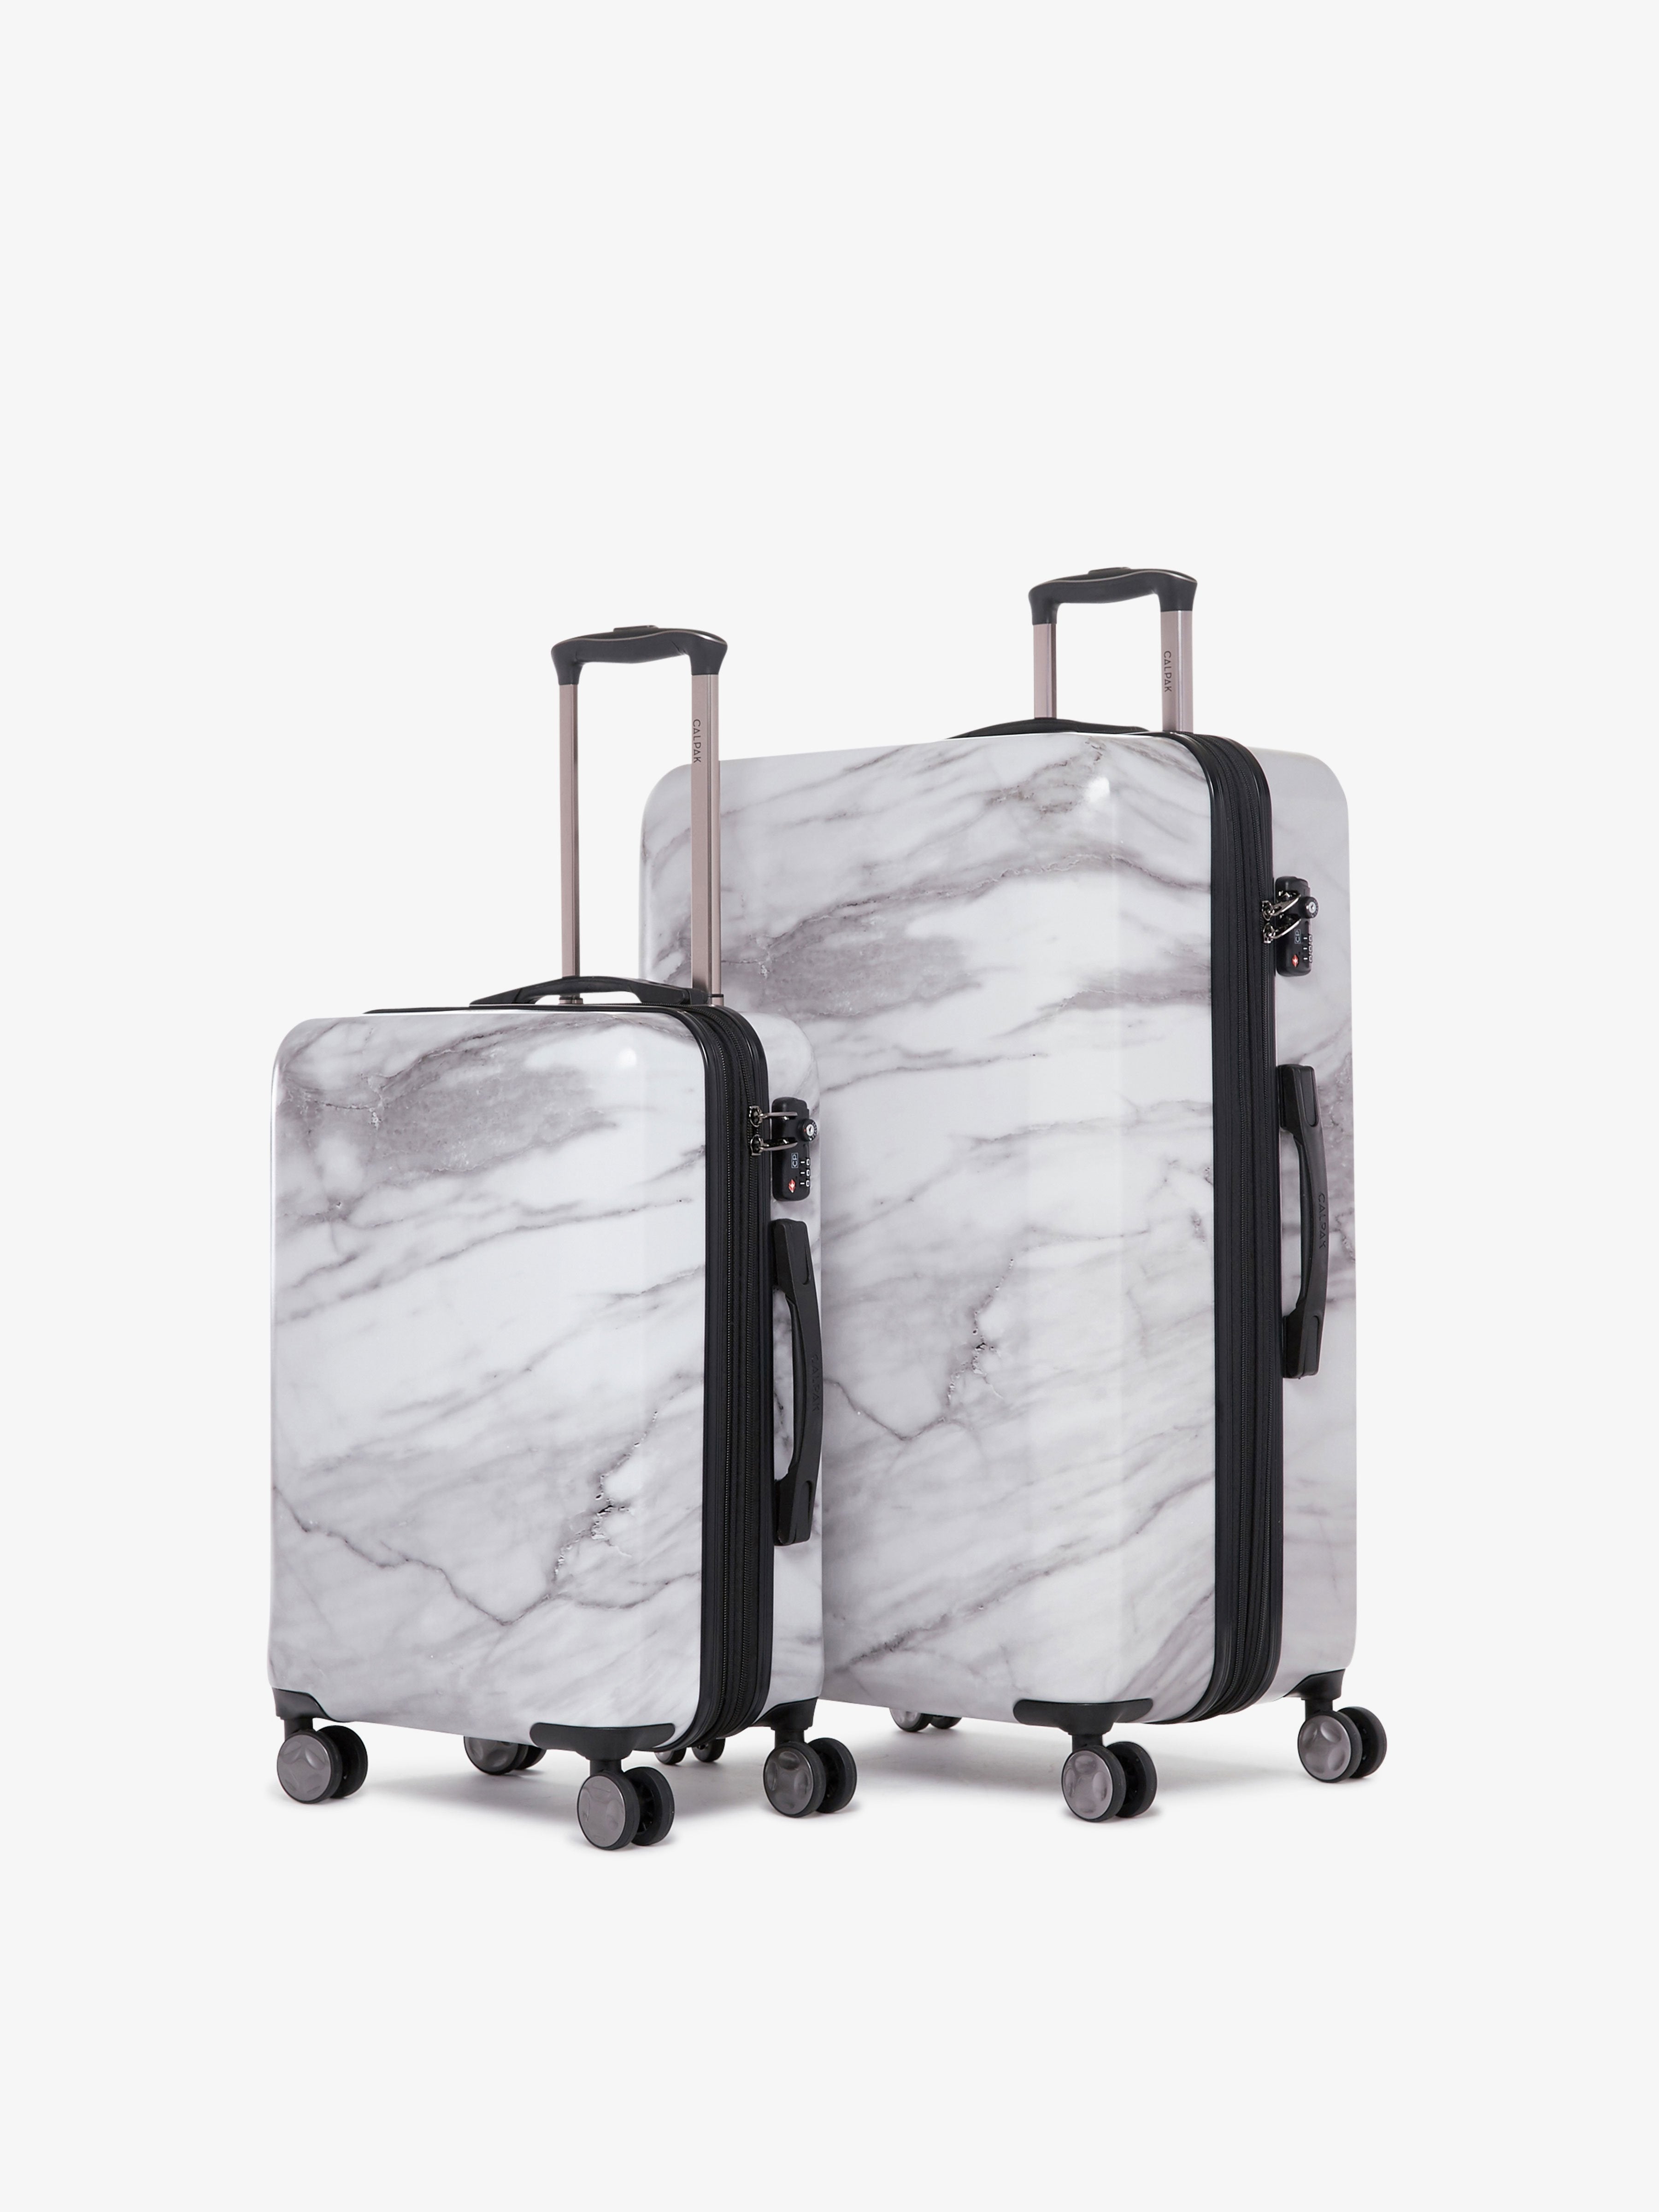 2 piece CALPAK Astyll white marble luggage set that includes carry on and large suitcase; LAT2000-MILK-MARBLE